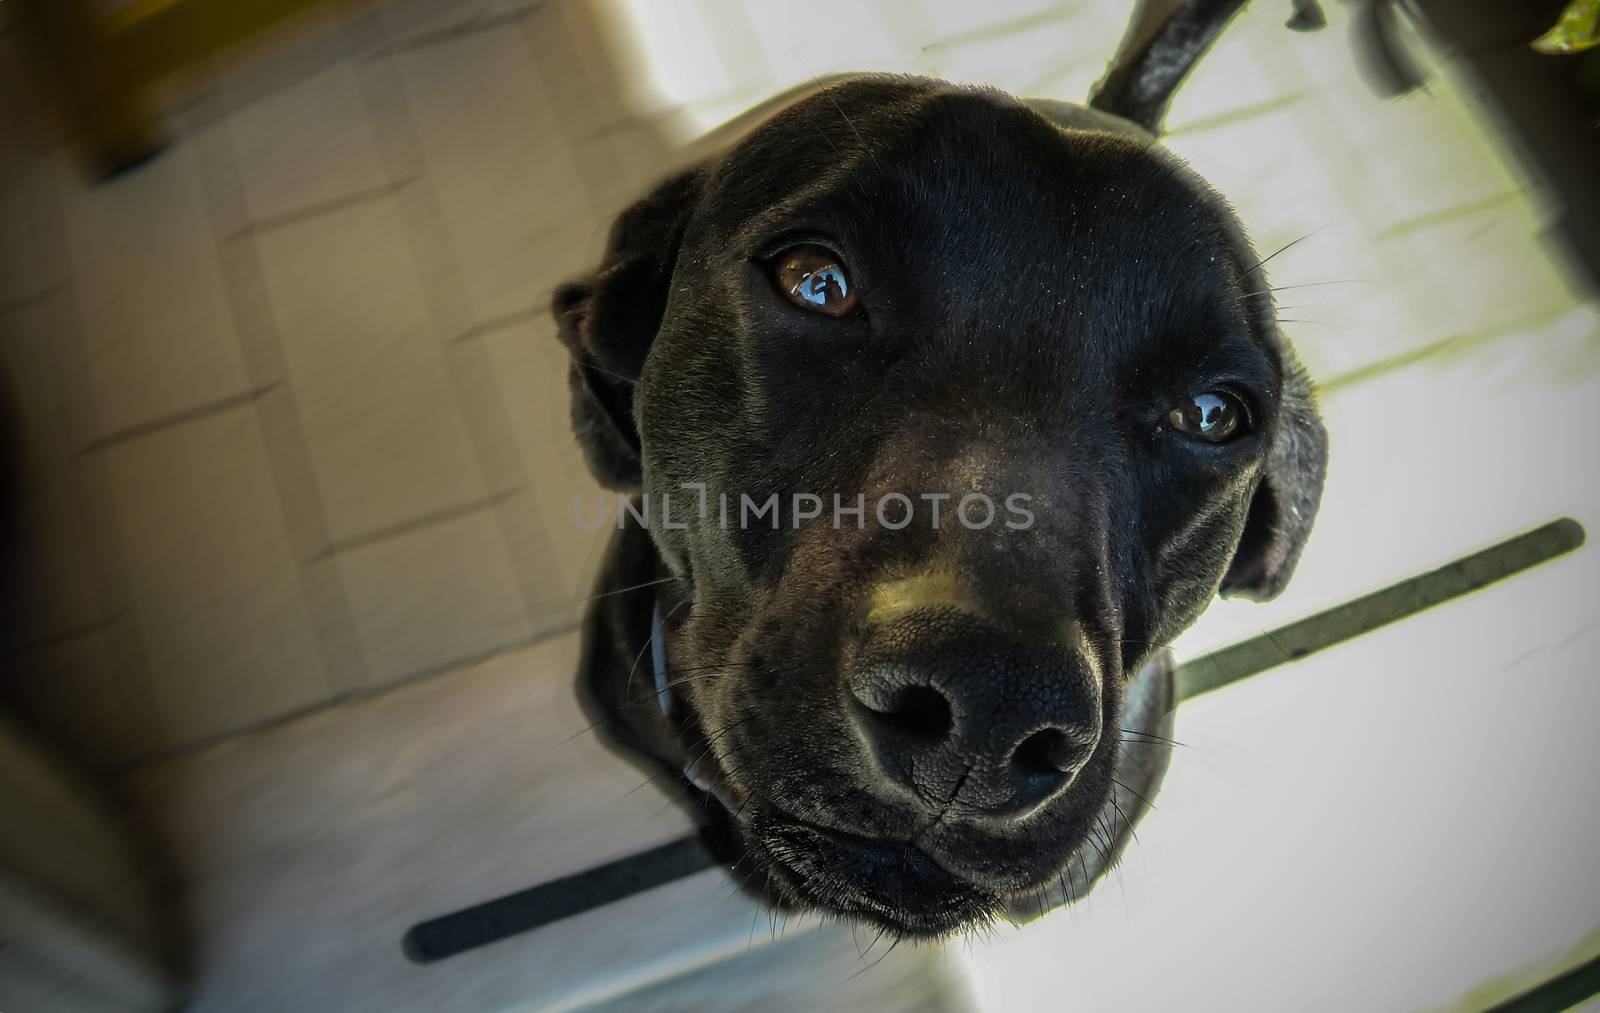 The muzzle of a black dog in the foreground with the gentle and friendly look.